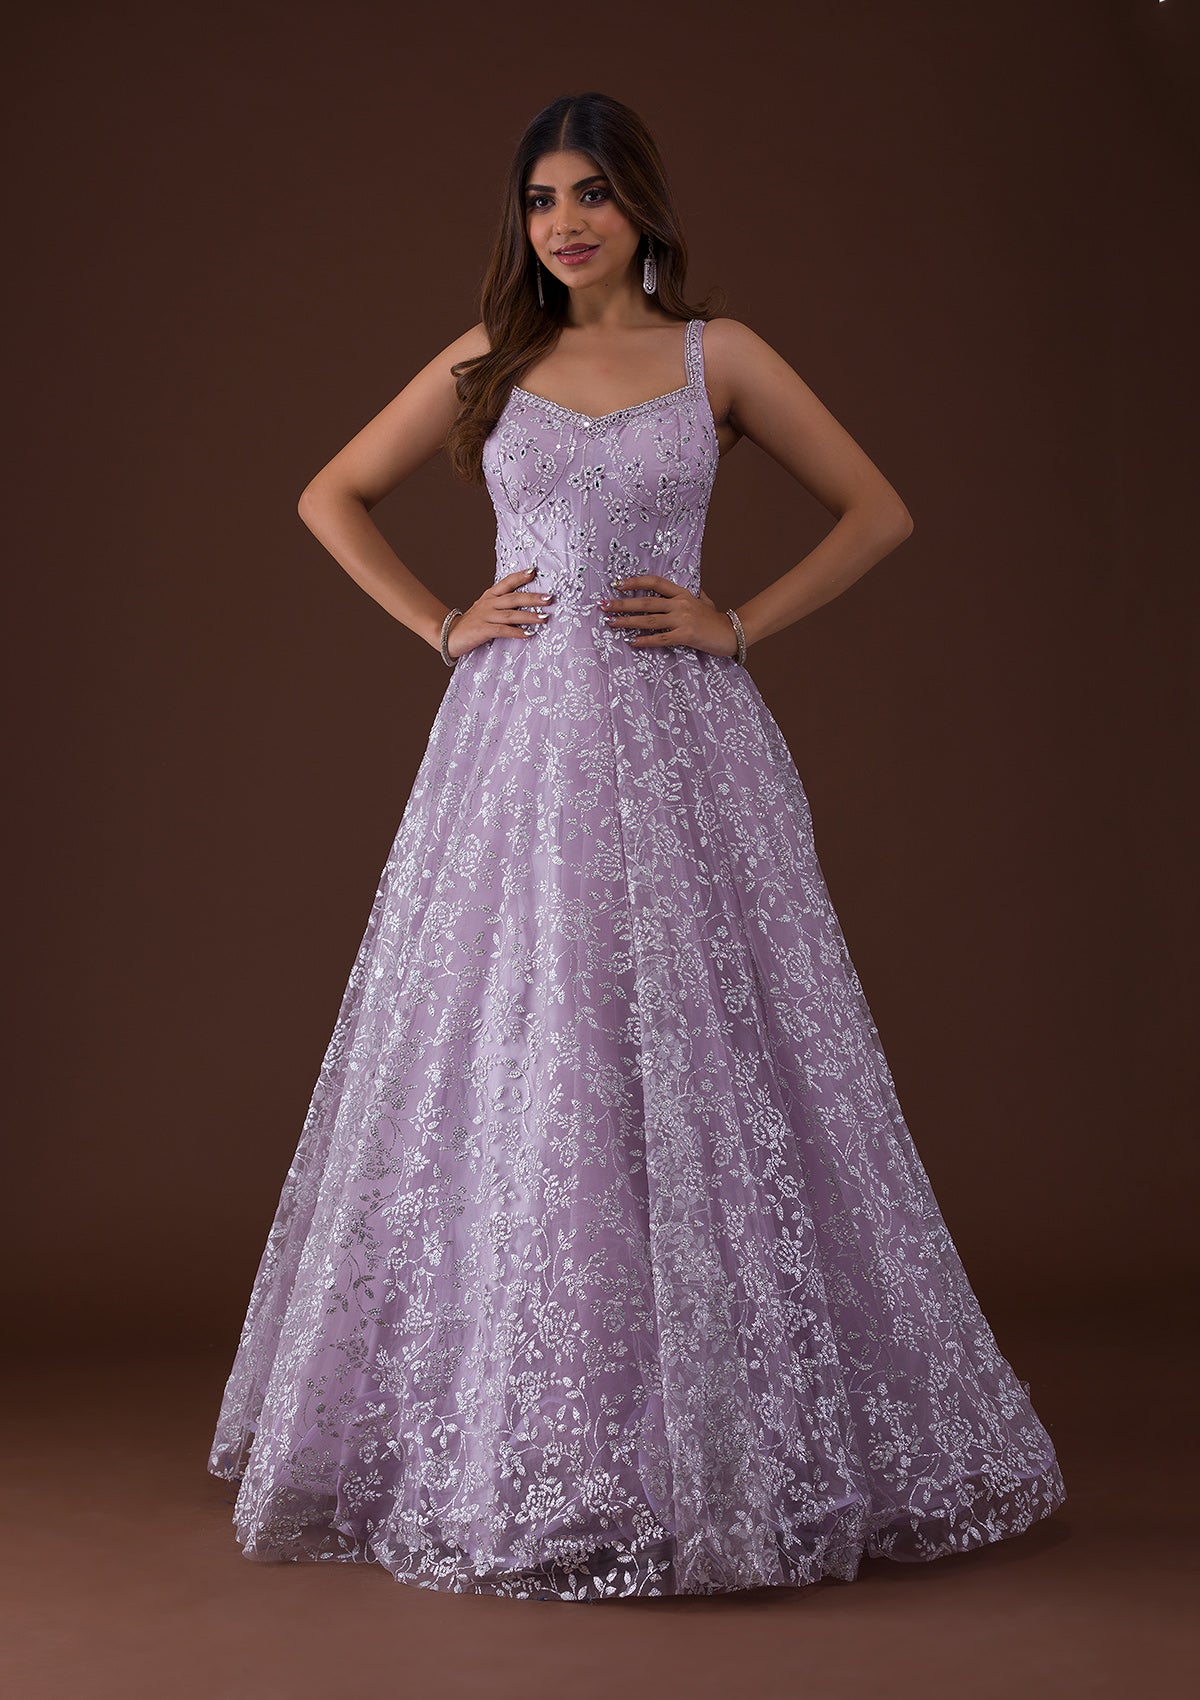 Buy Indian Evening Gowns Online At Best Prices – Koskii